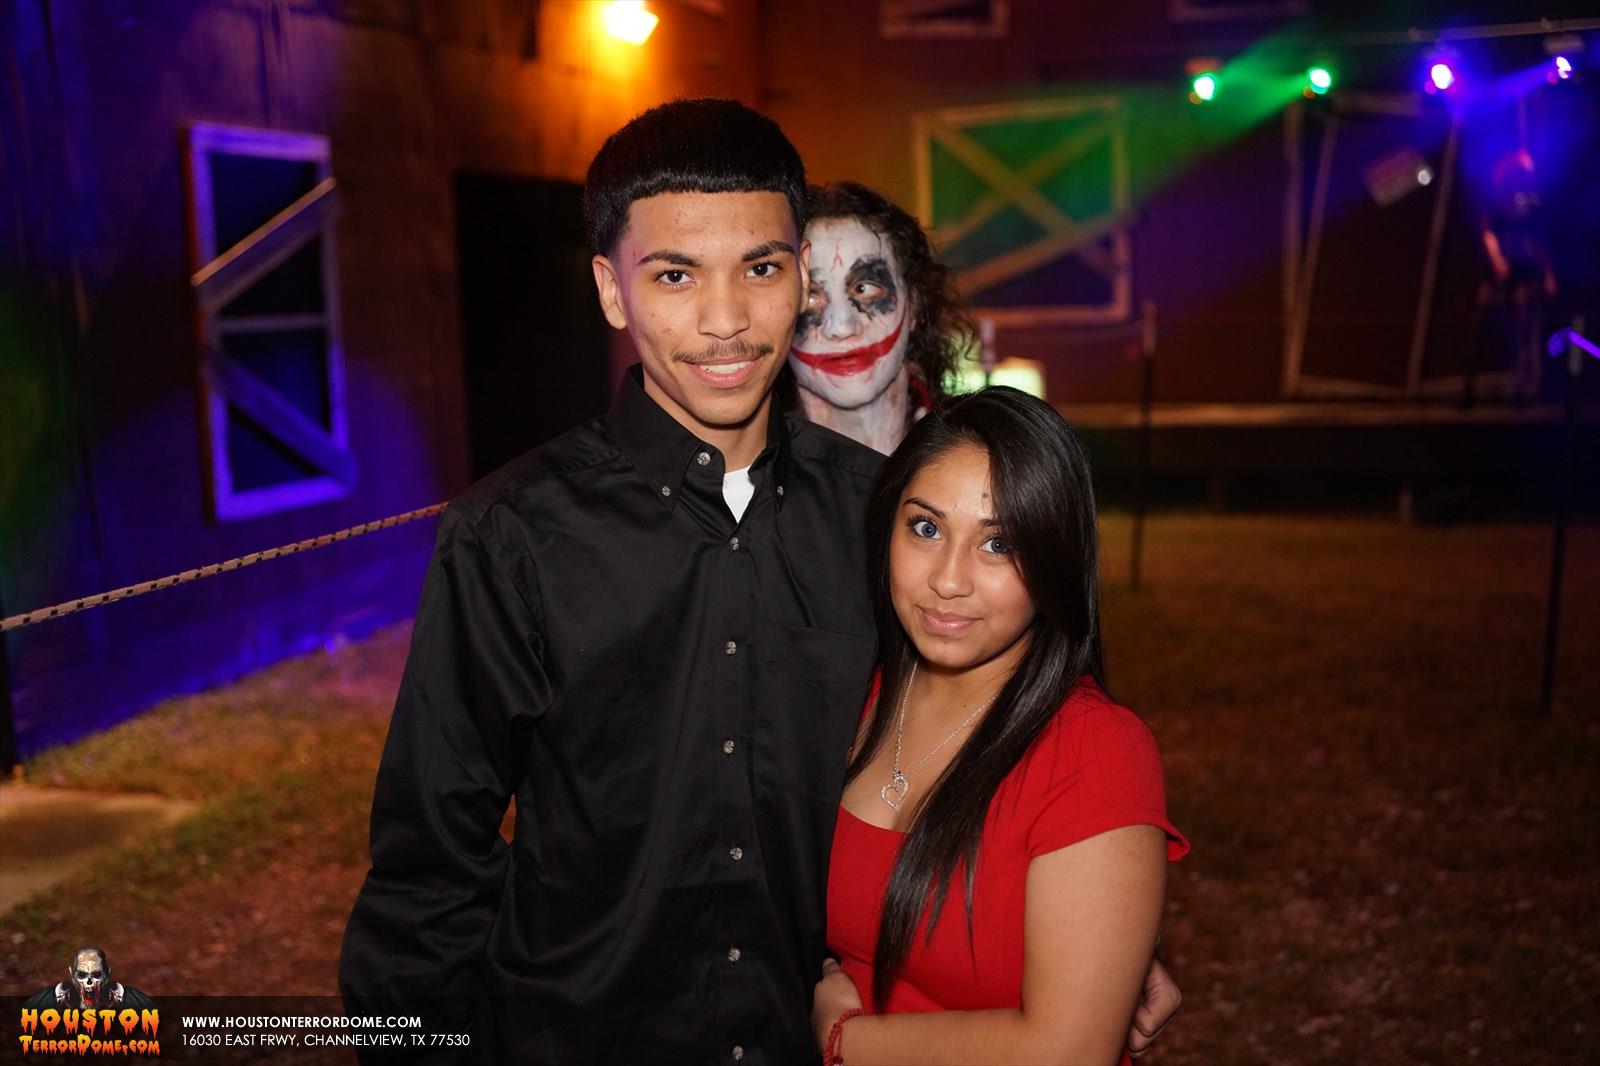 The Joker Photo Bombing a couple at the Houston Terror Dome Haunted House